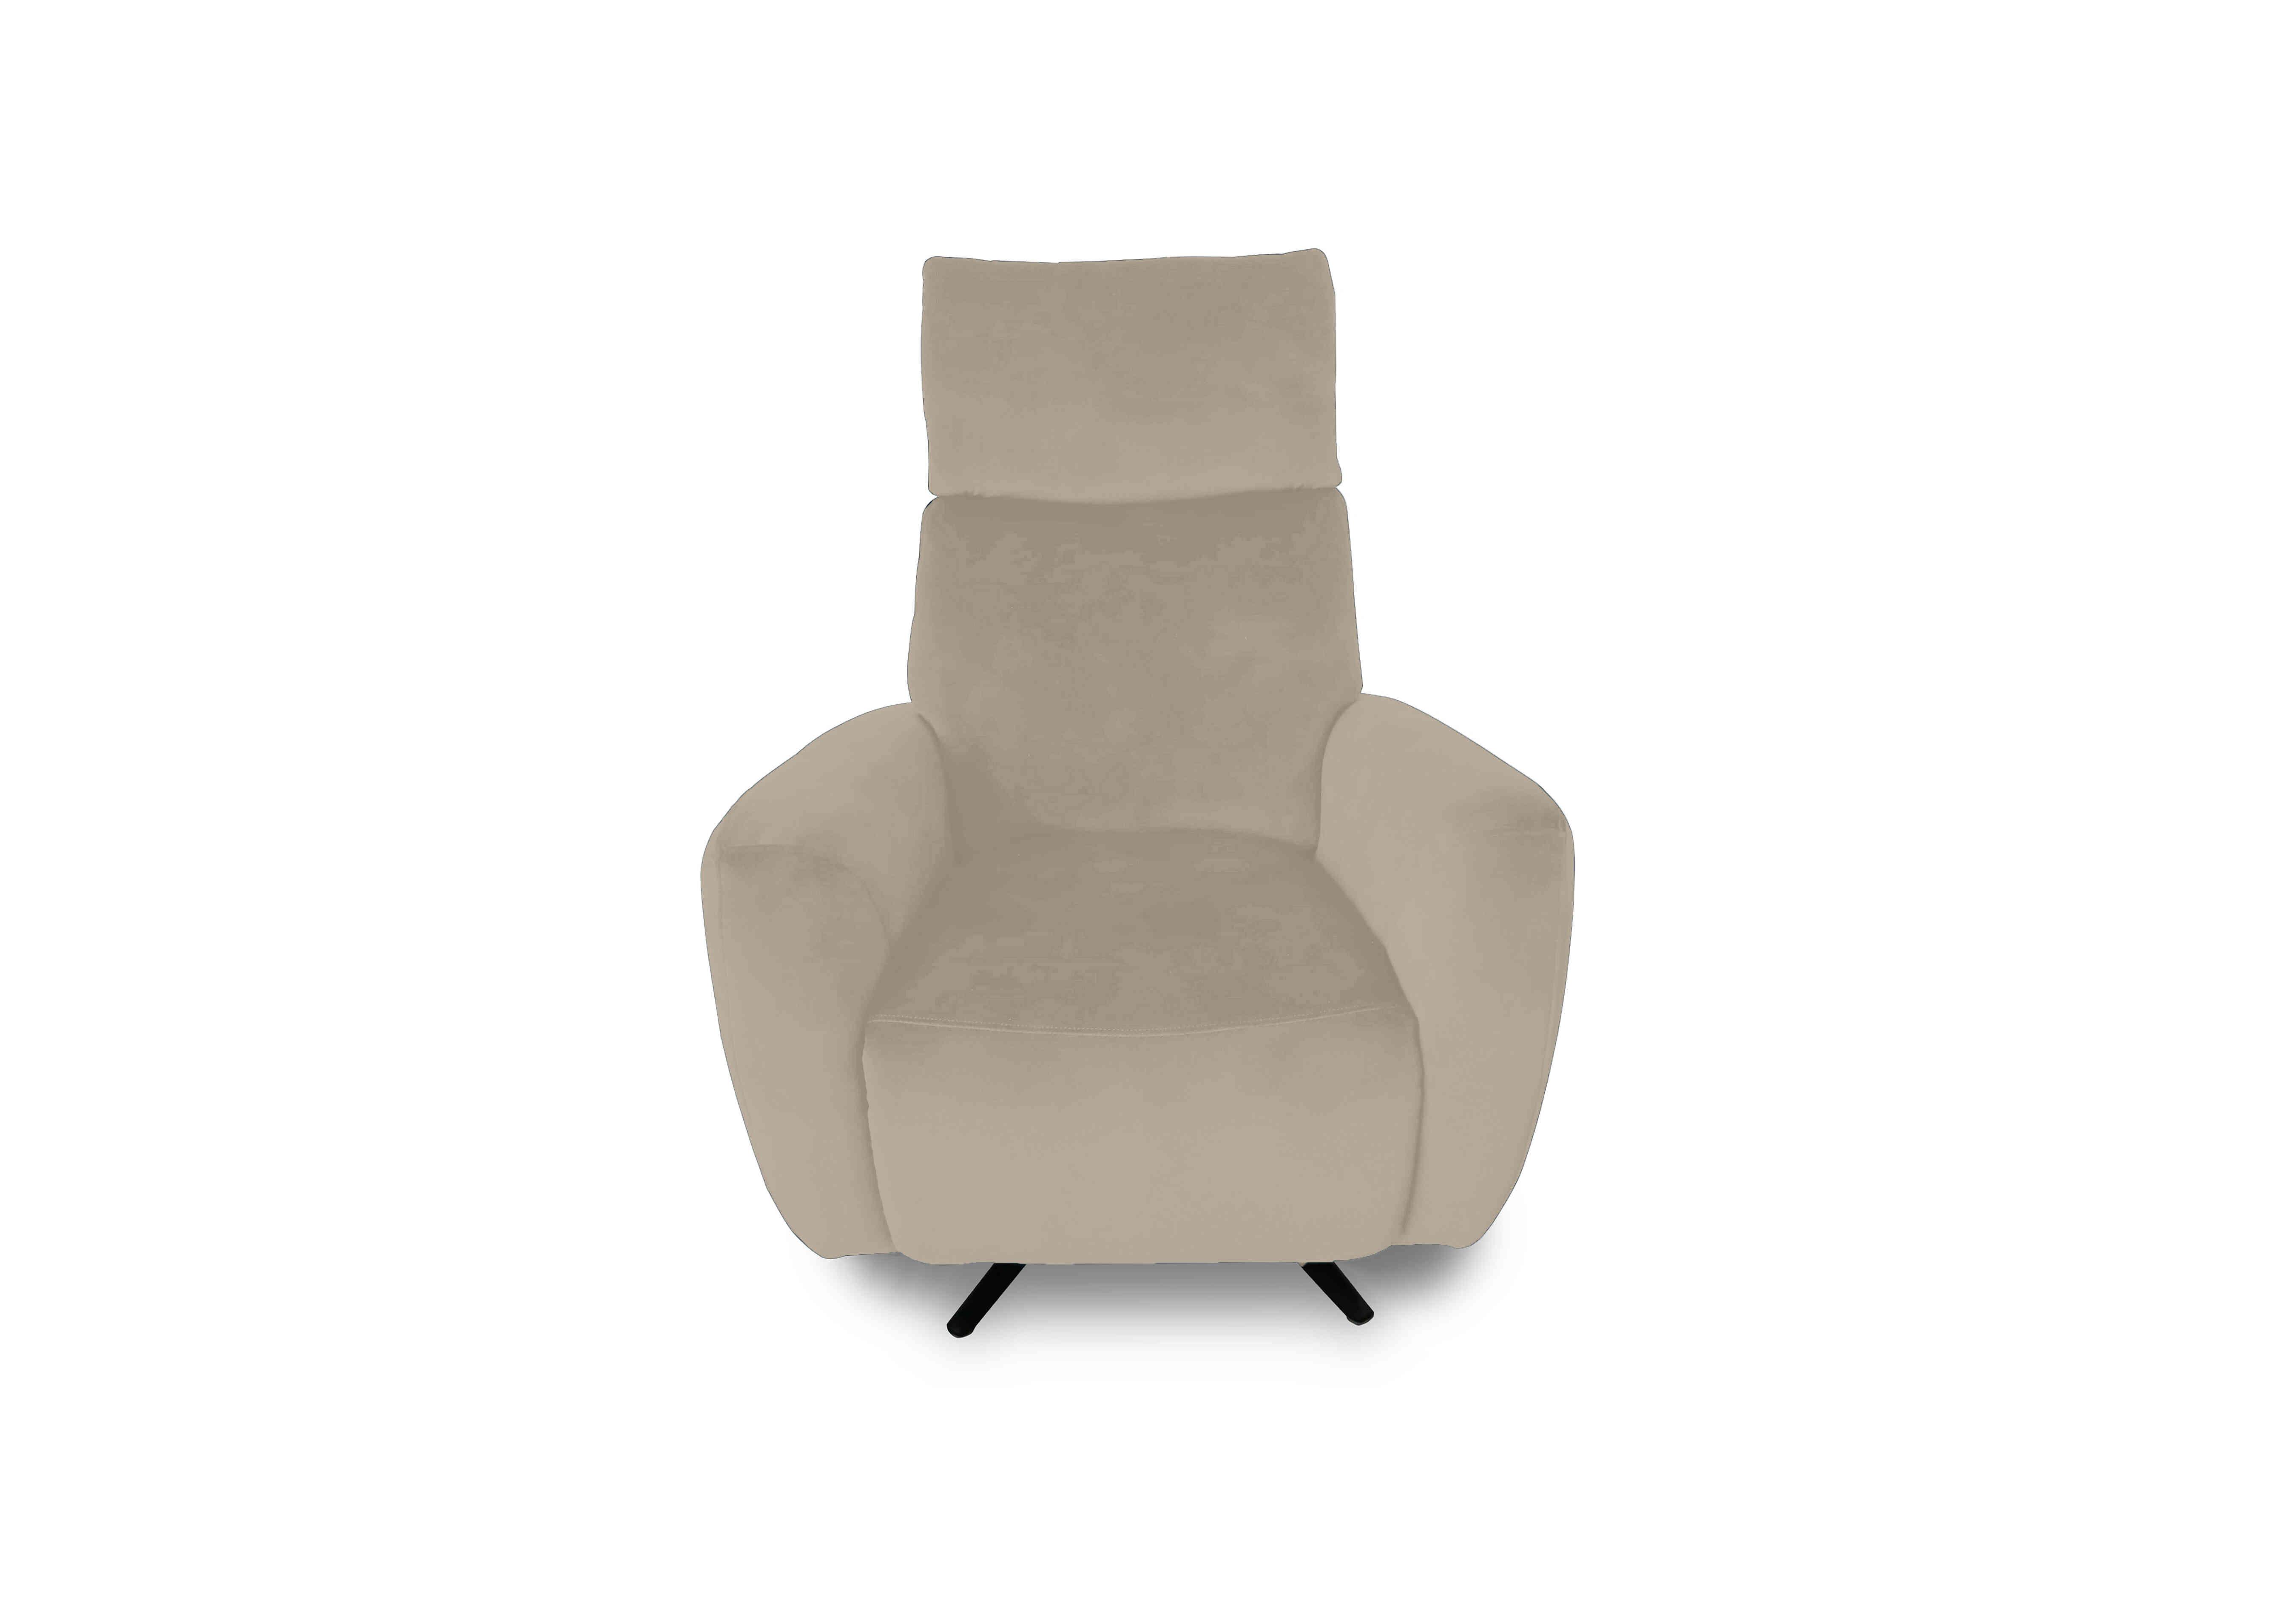 Designer Chair Collection Granada Fabric Power Recliner Swivel Chair with Massage Feature in Fab-Meg-R32 Light Khaki on Furniture Village